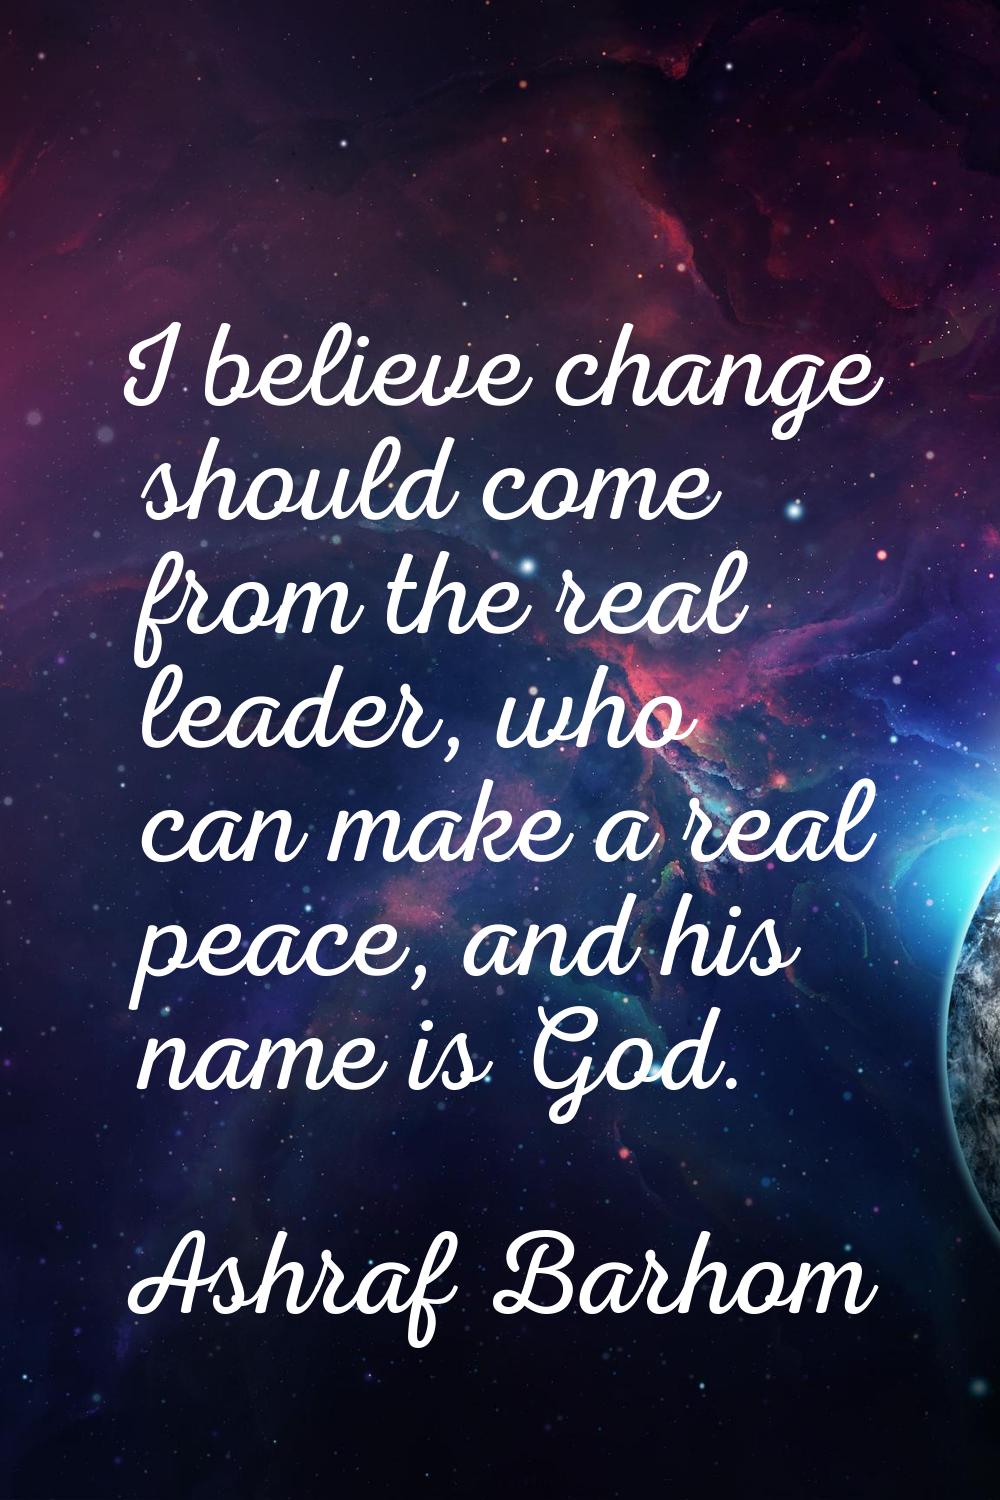 I believe change should come from the real leader, who can make a real peace, and his name is God.